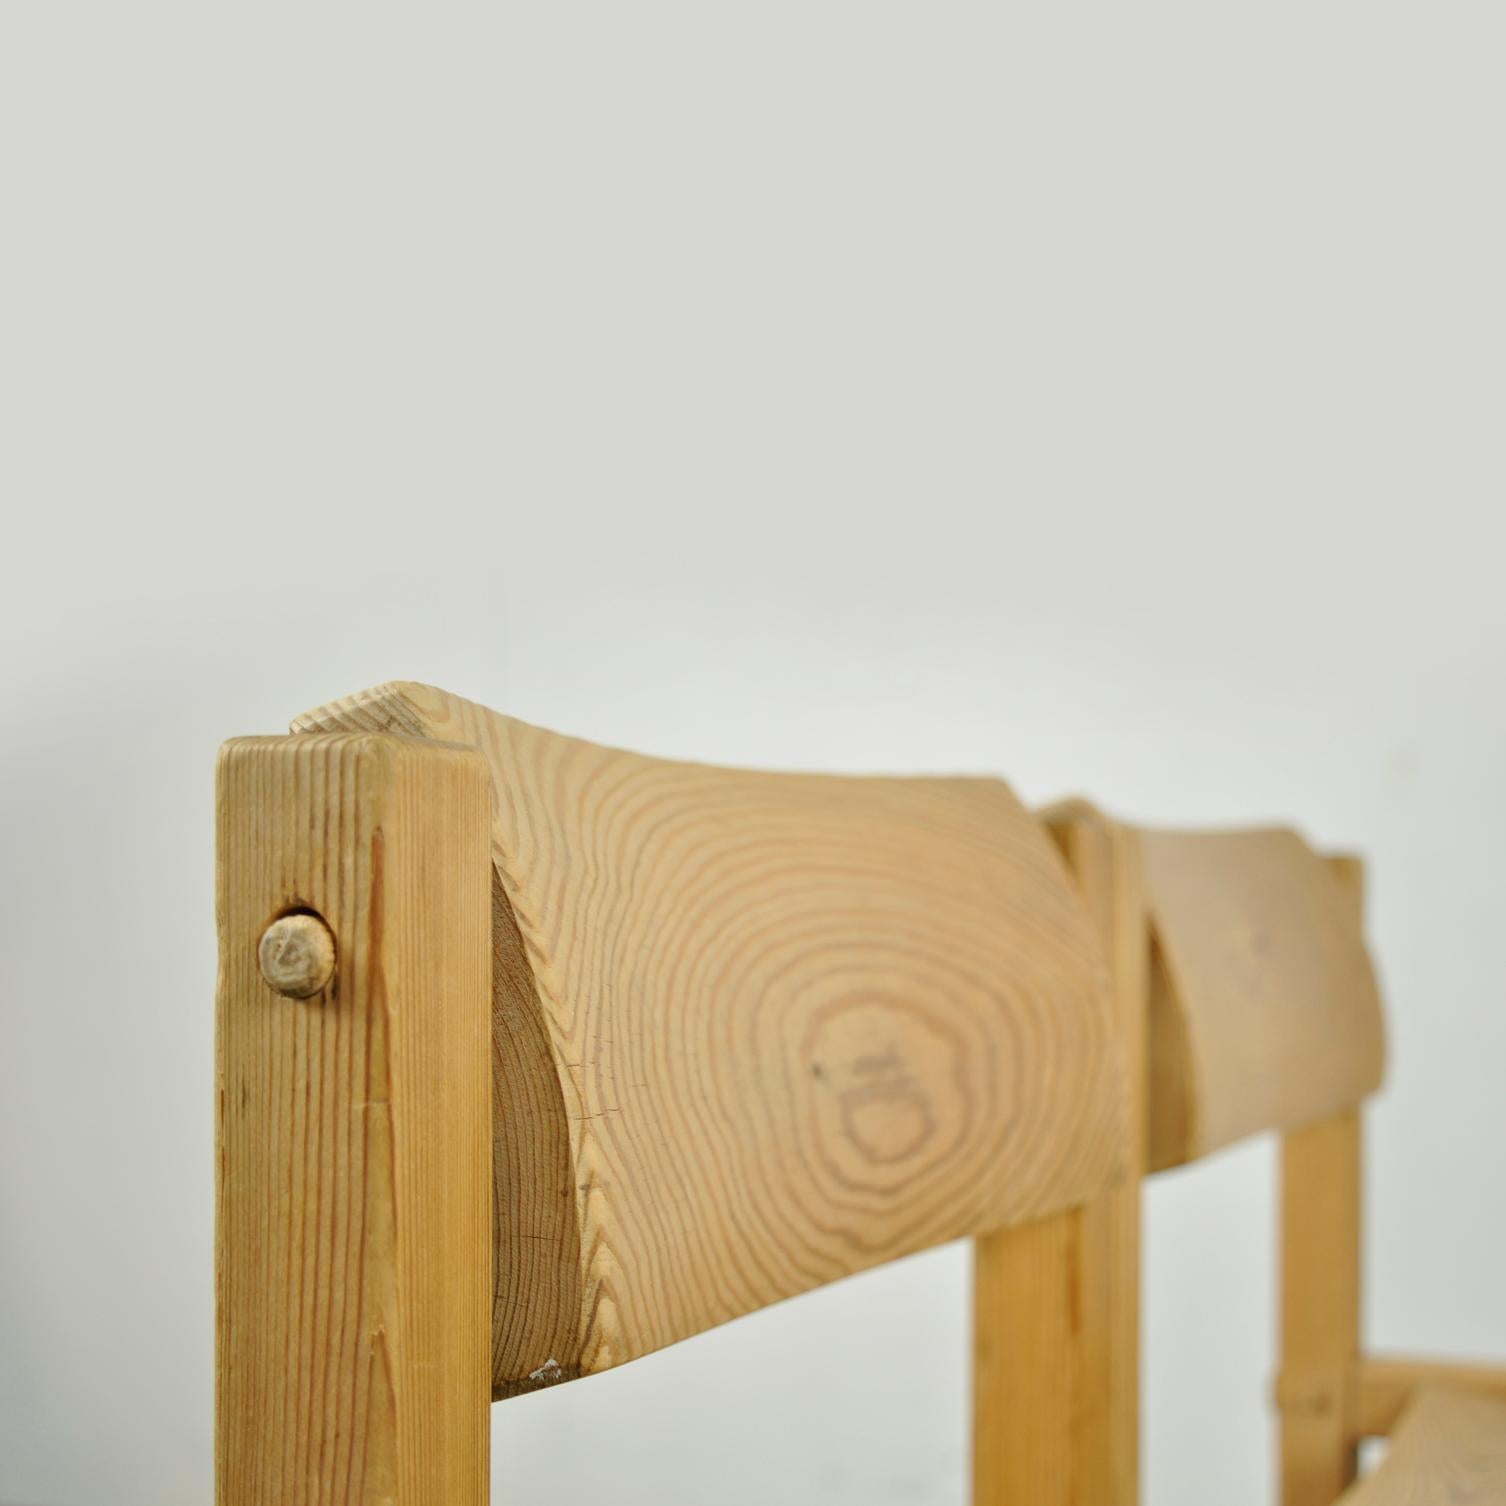 Trybo pine dining chairs (4) by Edvin Helseth for Stange Bruk, Norway 1960s For Sale 3